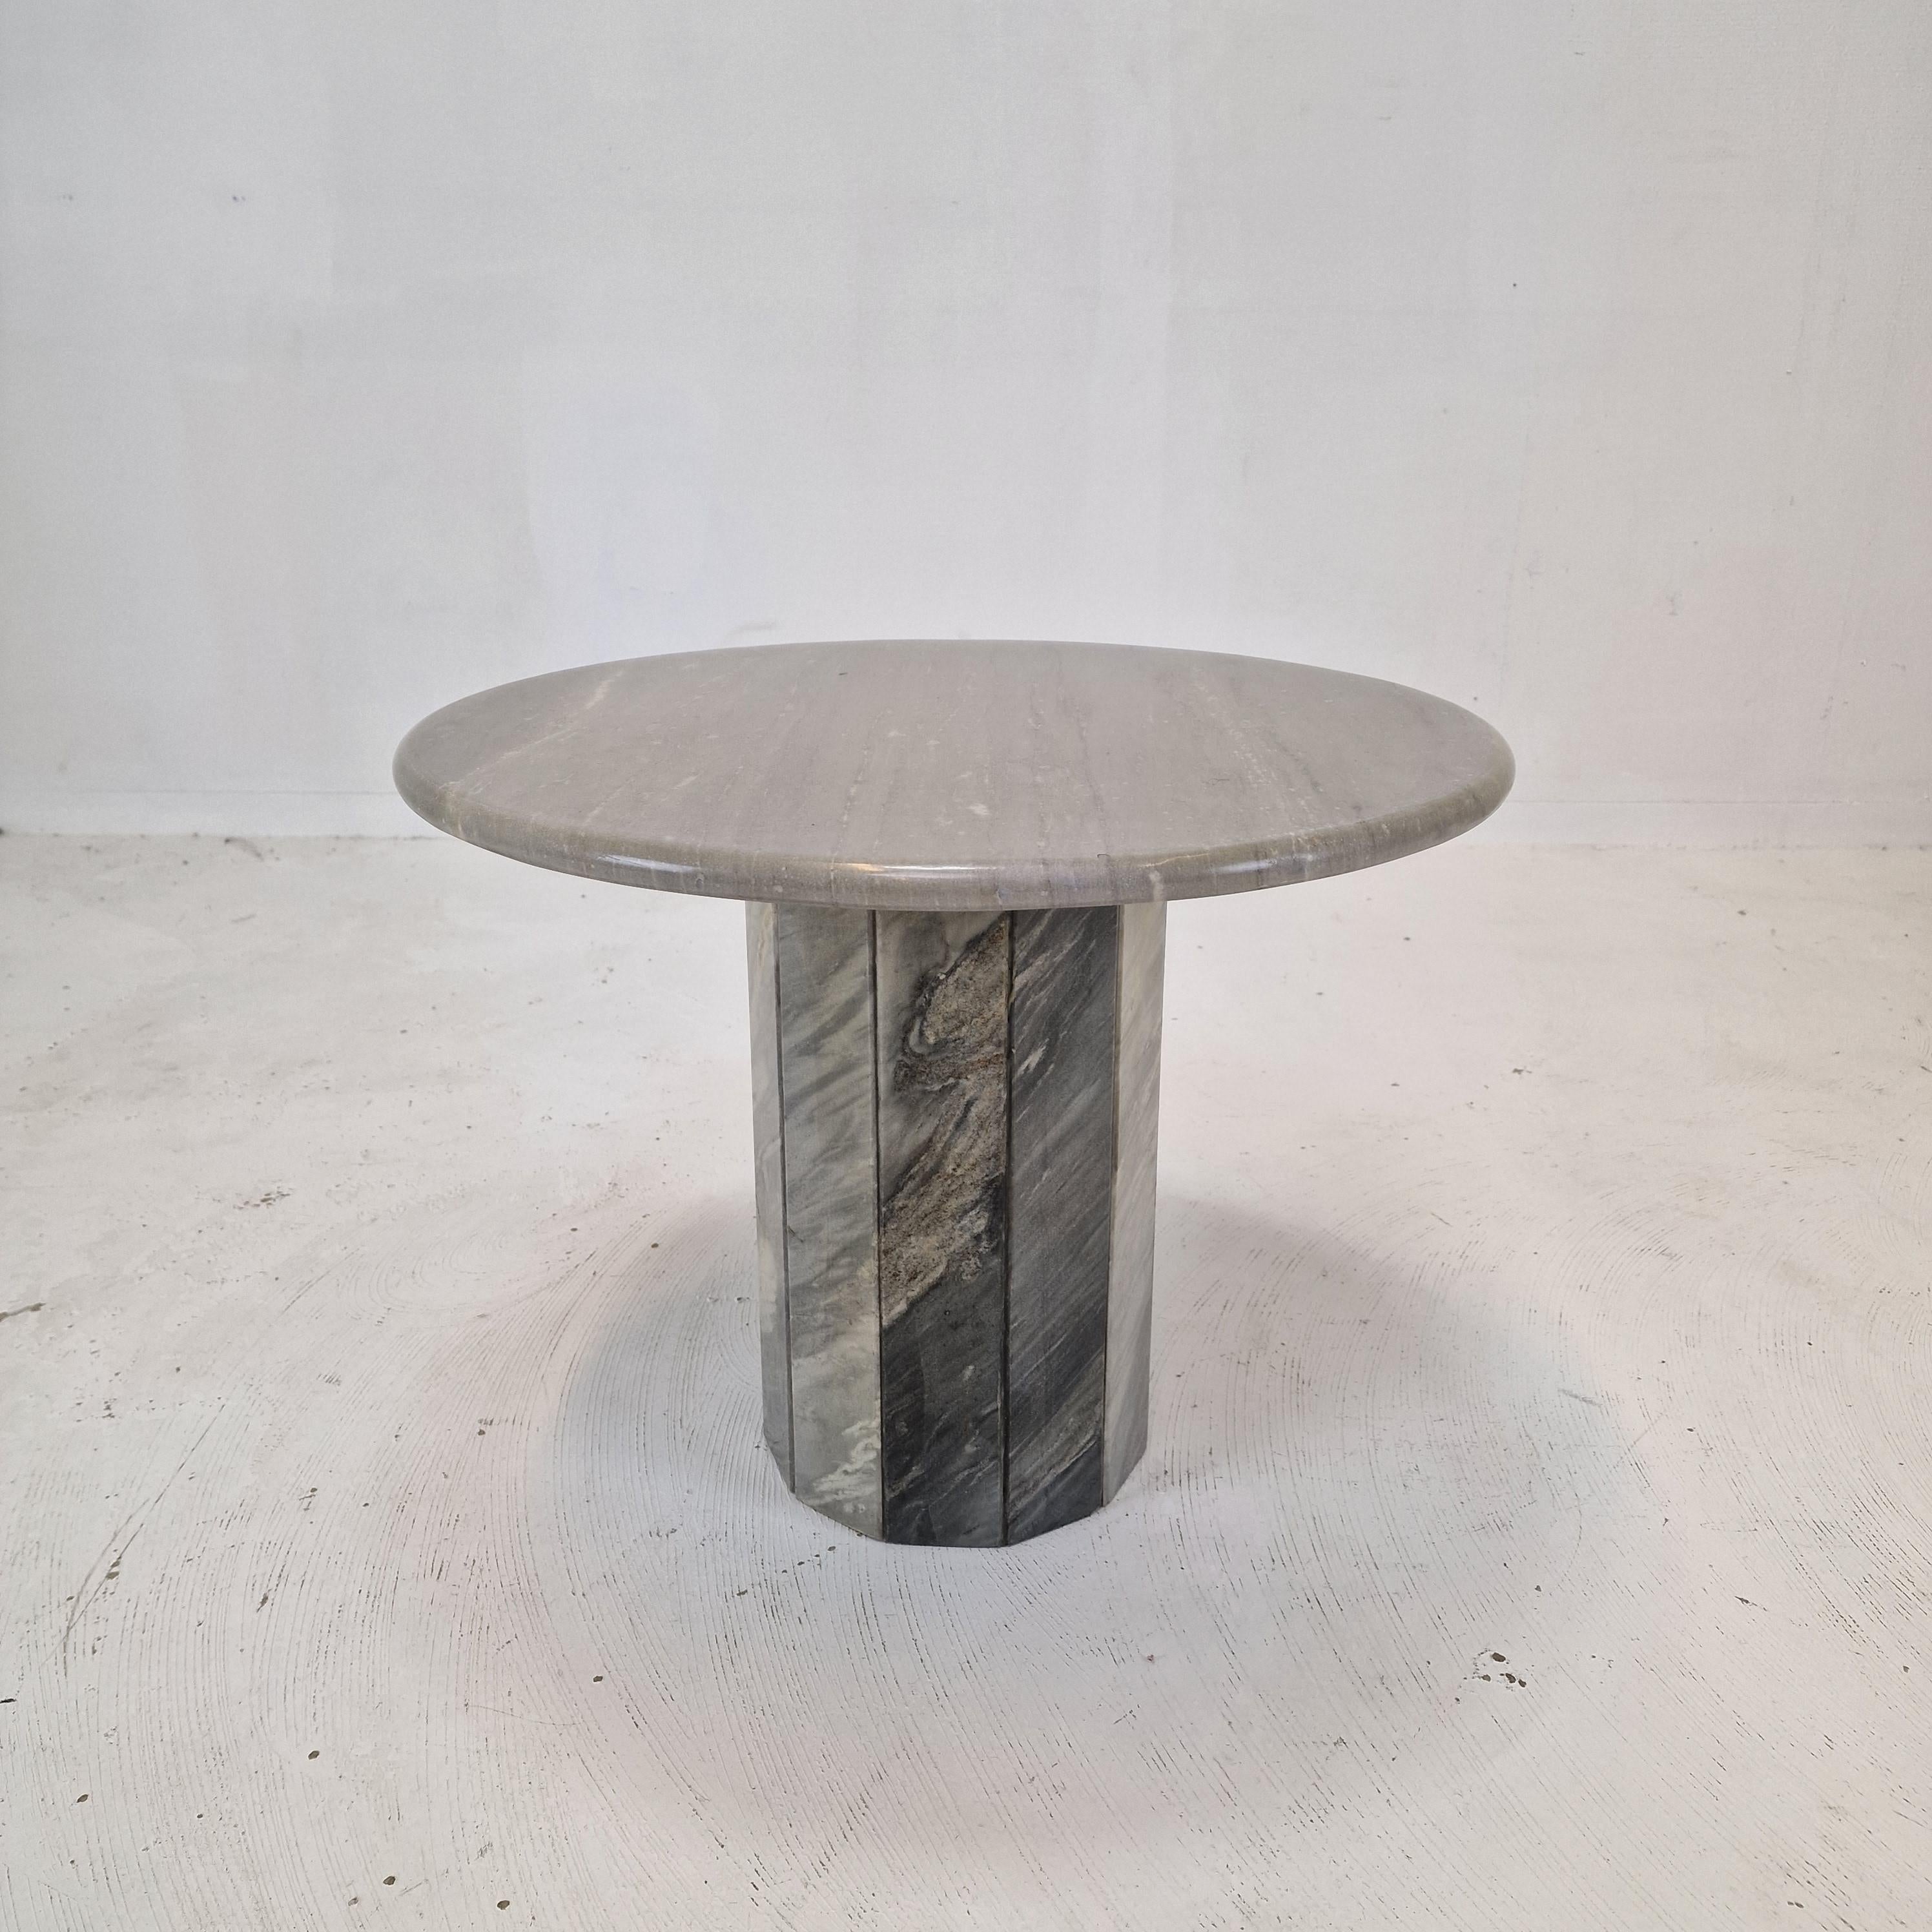 Very nice round Italian marble coffee or side table, 1980's.

The fabulous marble features a beautiful pattern of different colors.

It is in very good condition, with the normal traces of use.

We work with professional packers and shippers.